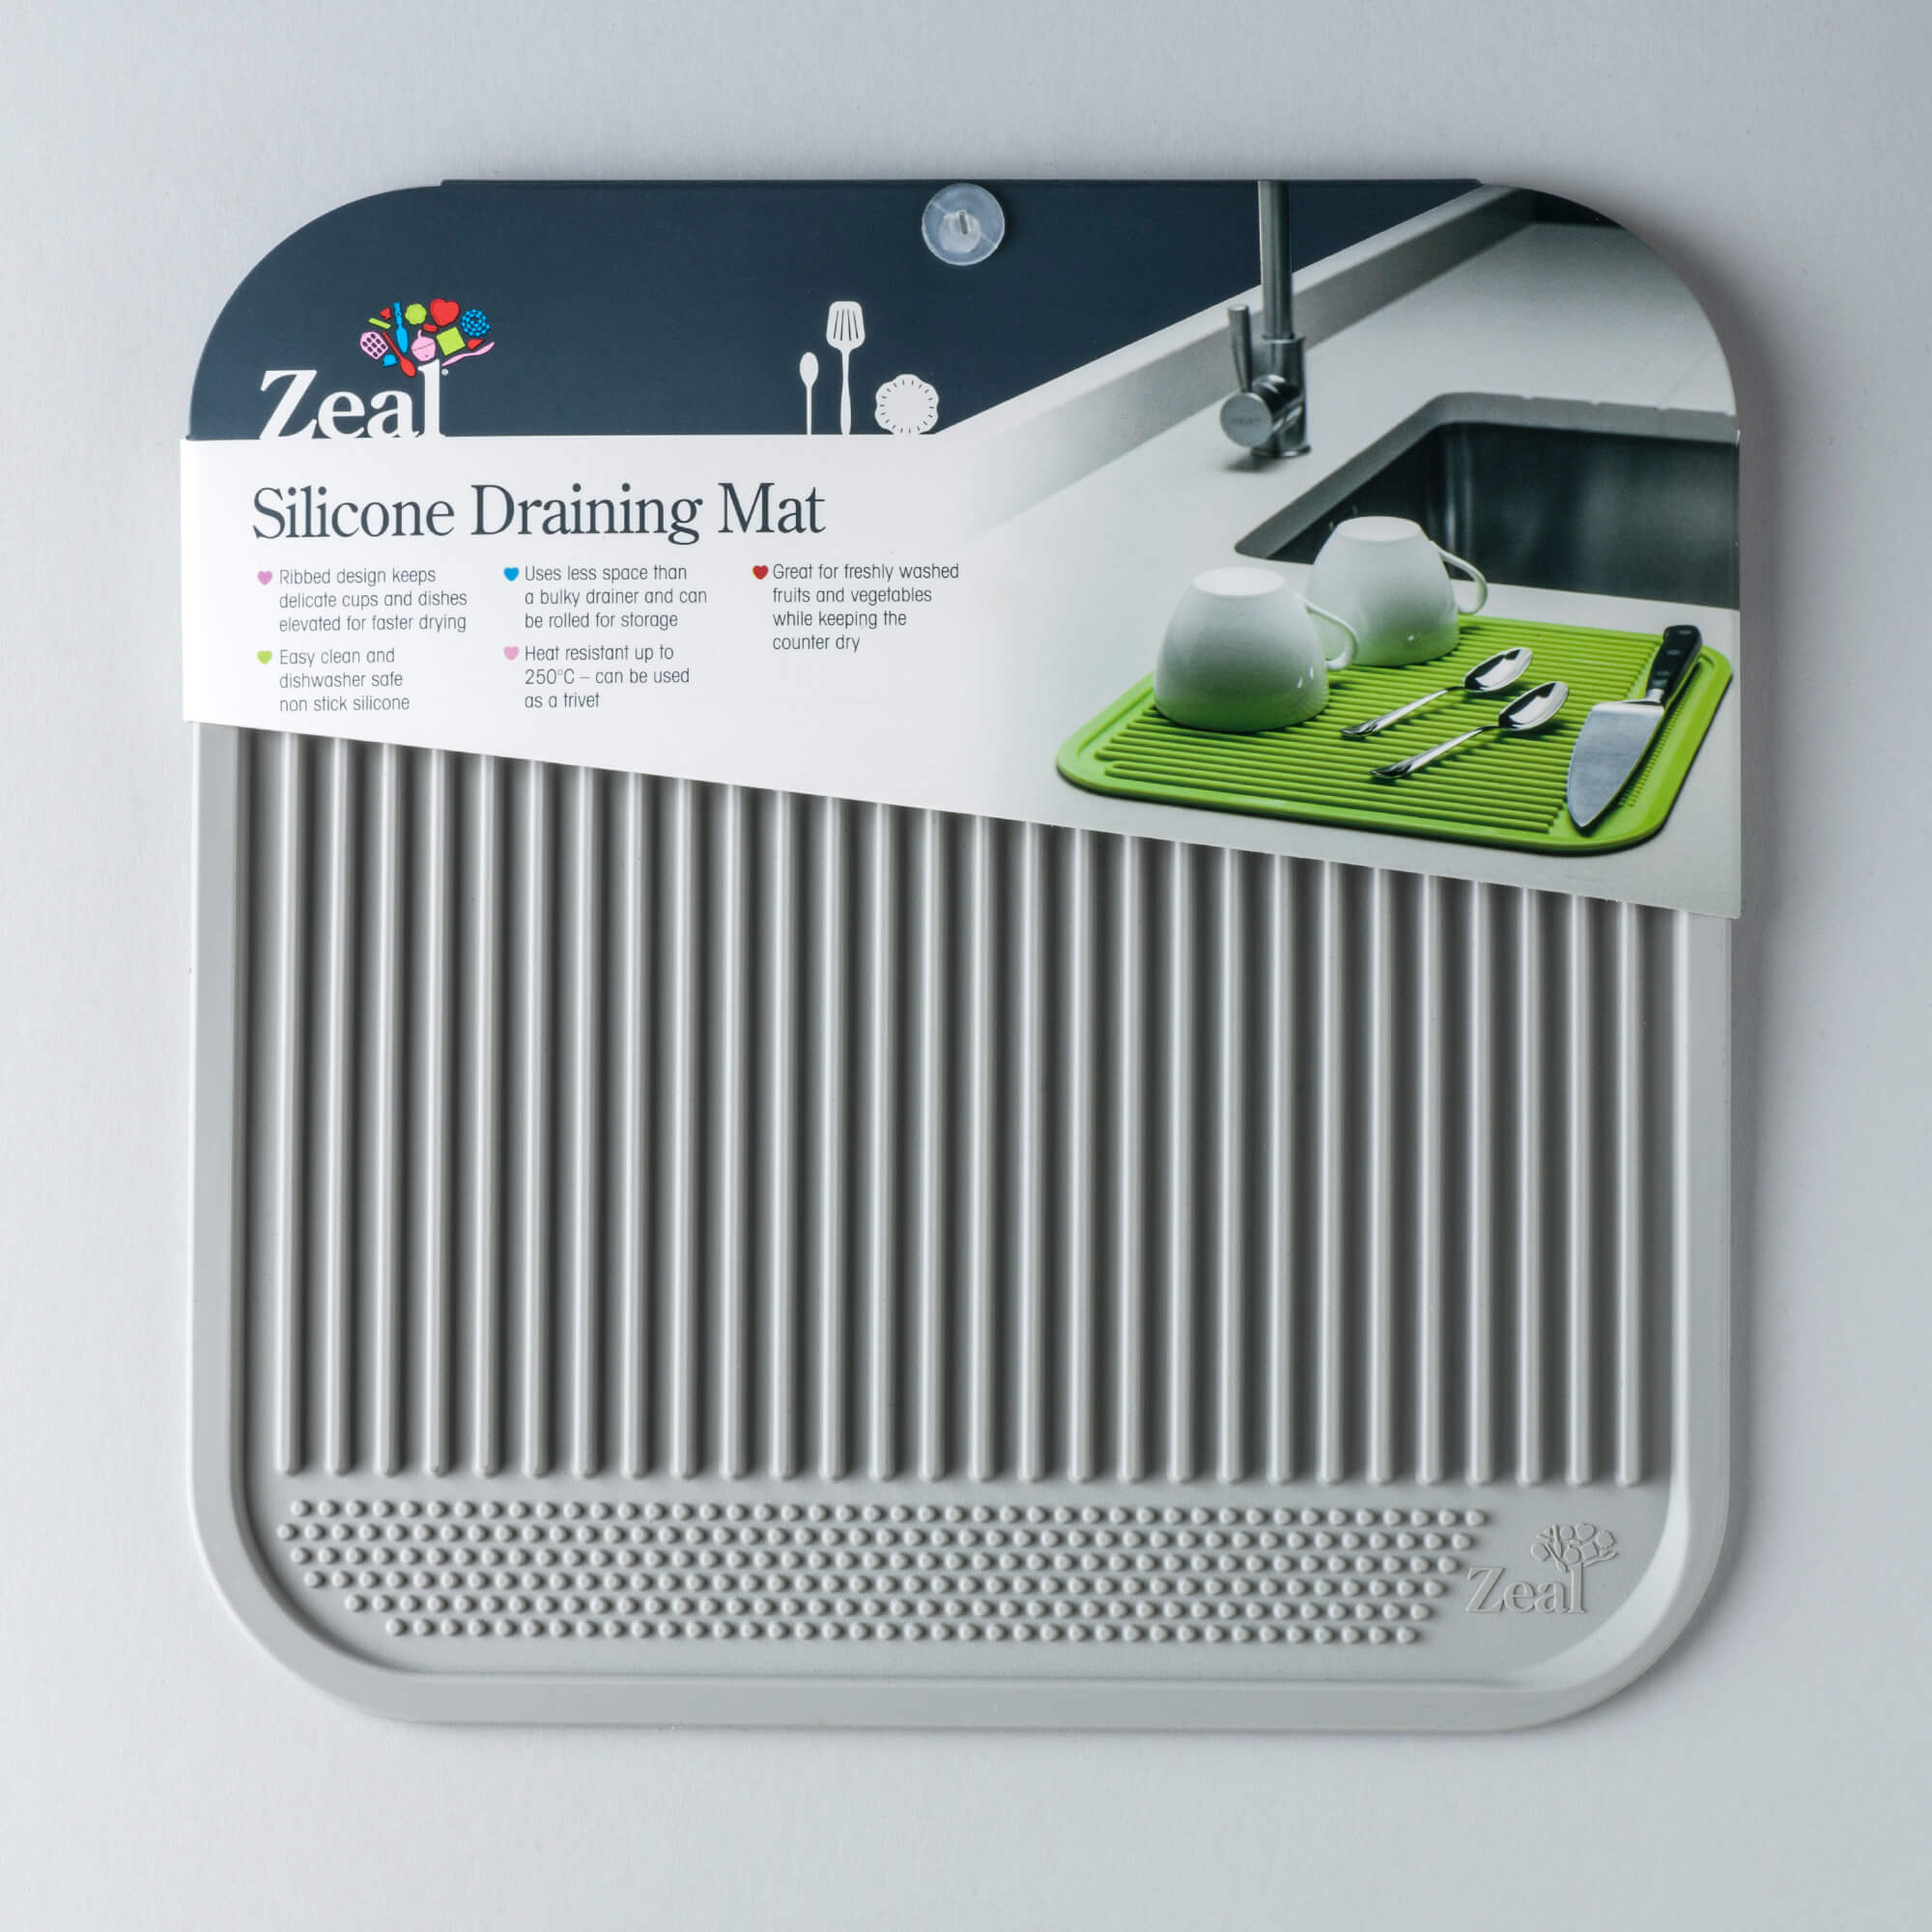 Zeal Silicone Draining Mat in packaging